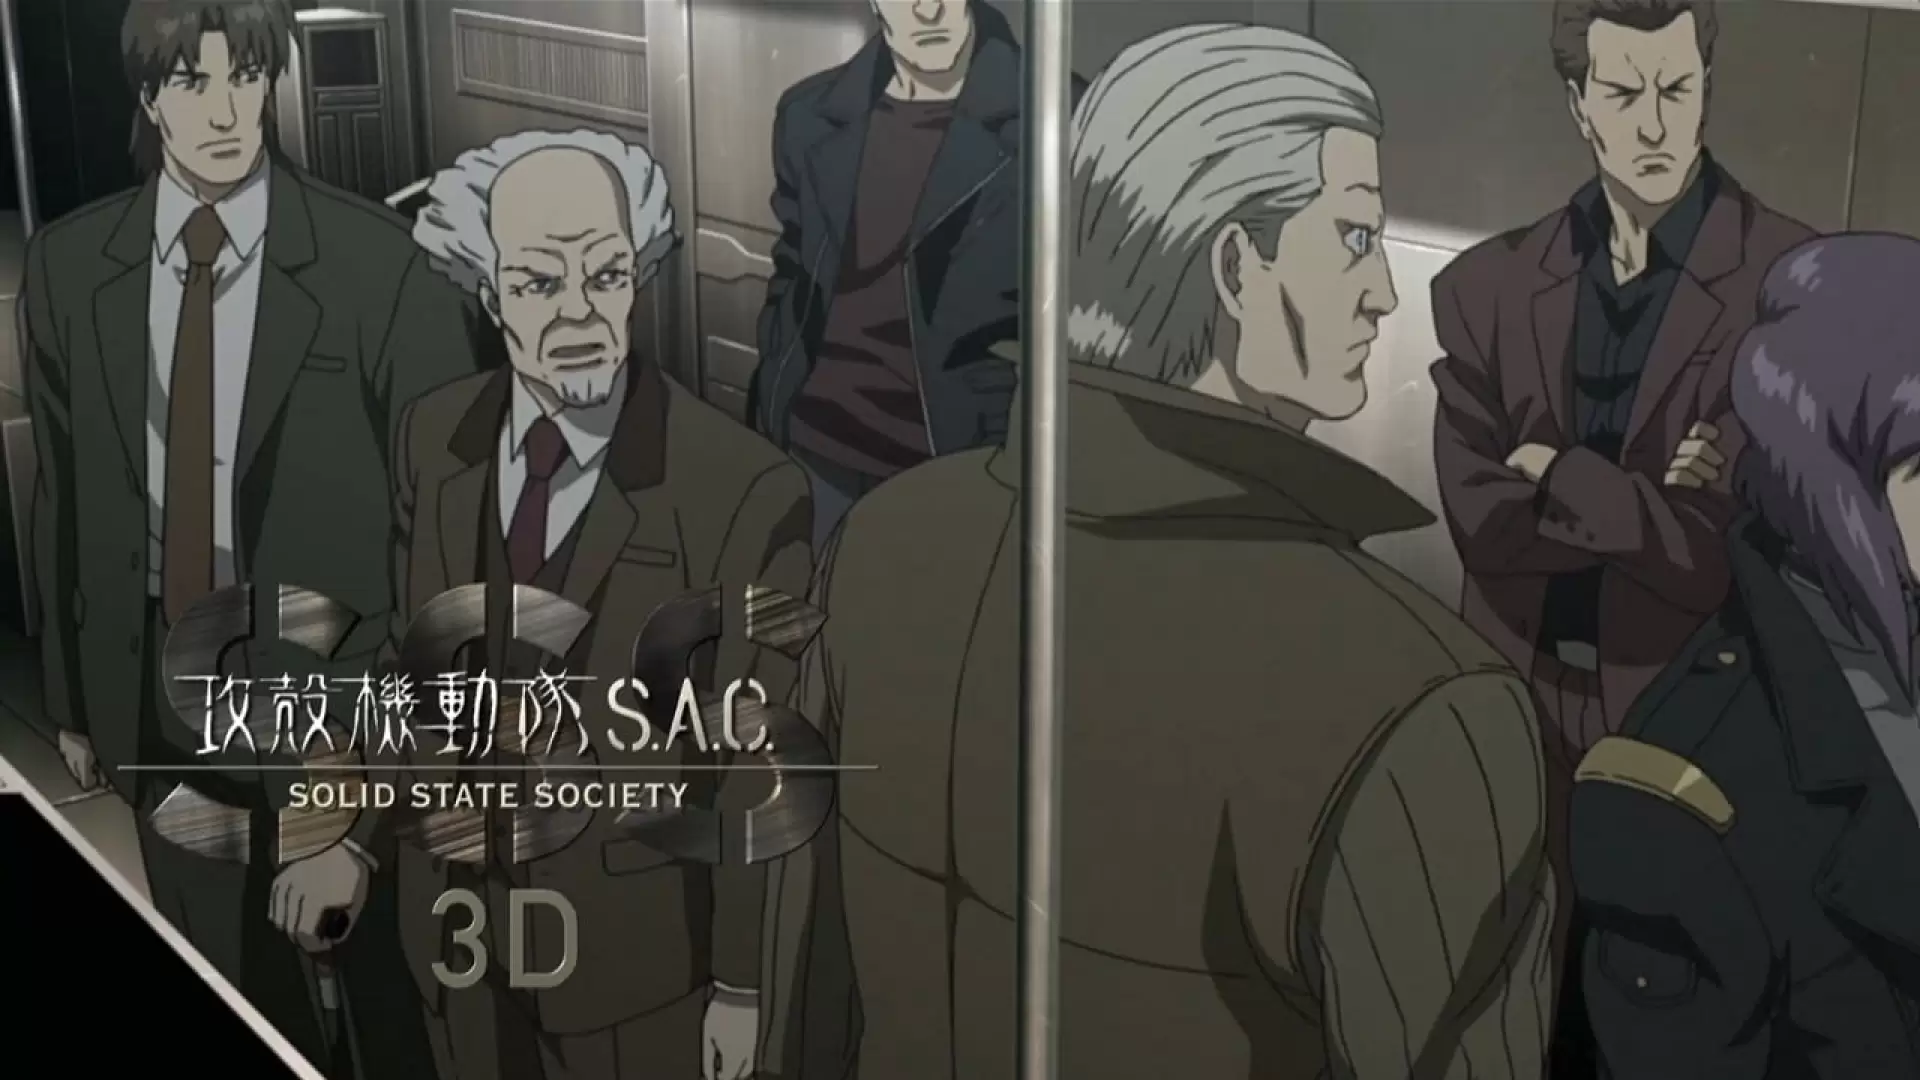 دانلود انیمه Ghost in the Shell S.A.C. Solid State Society 3D 2011